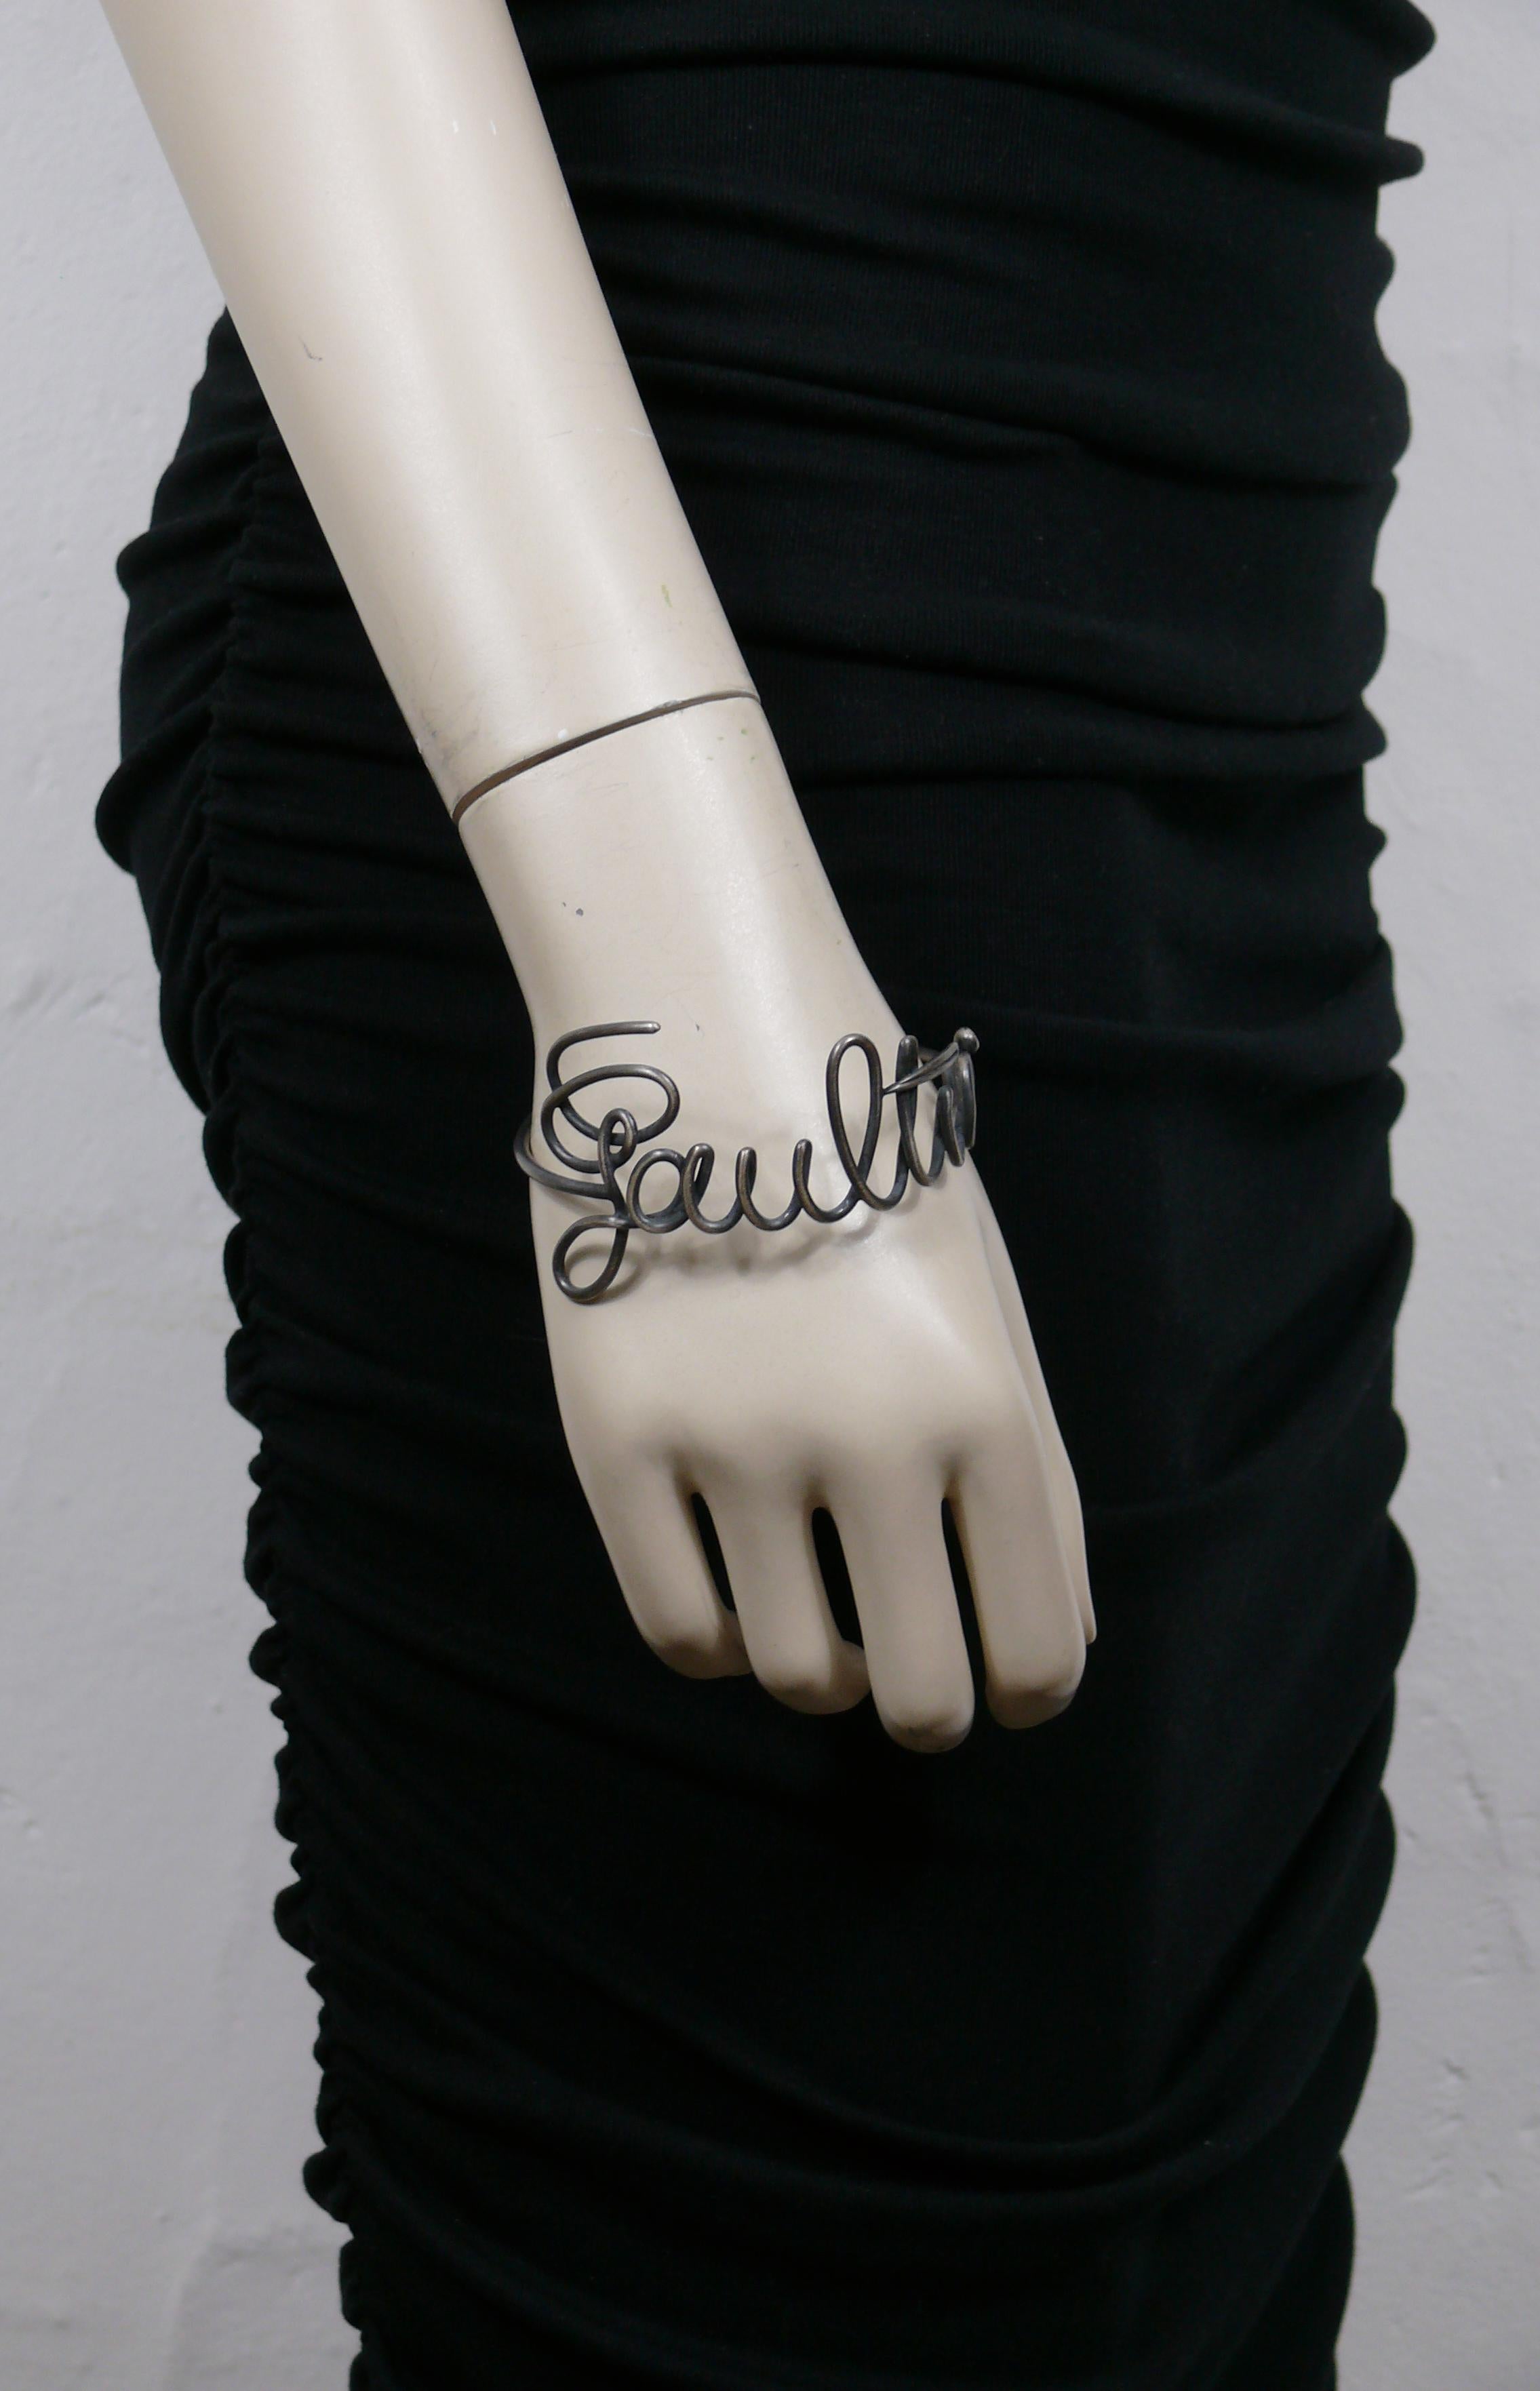 JEAN PAUL GAULTIER vintage gun metal tone bangle bracelet featuring GAULTIER cursive signature.

Slips on (no clasp closure).

Unmarked.

Indicative measurements : circumference approx. 20.73 cm (8.16 inches) / max. width approx. 4 cm (1.57